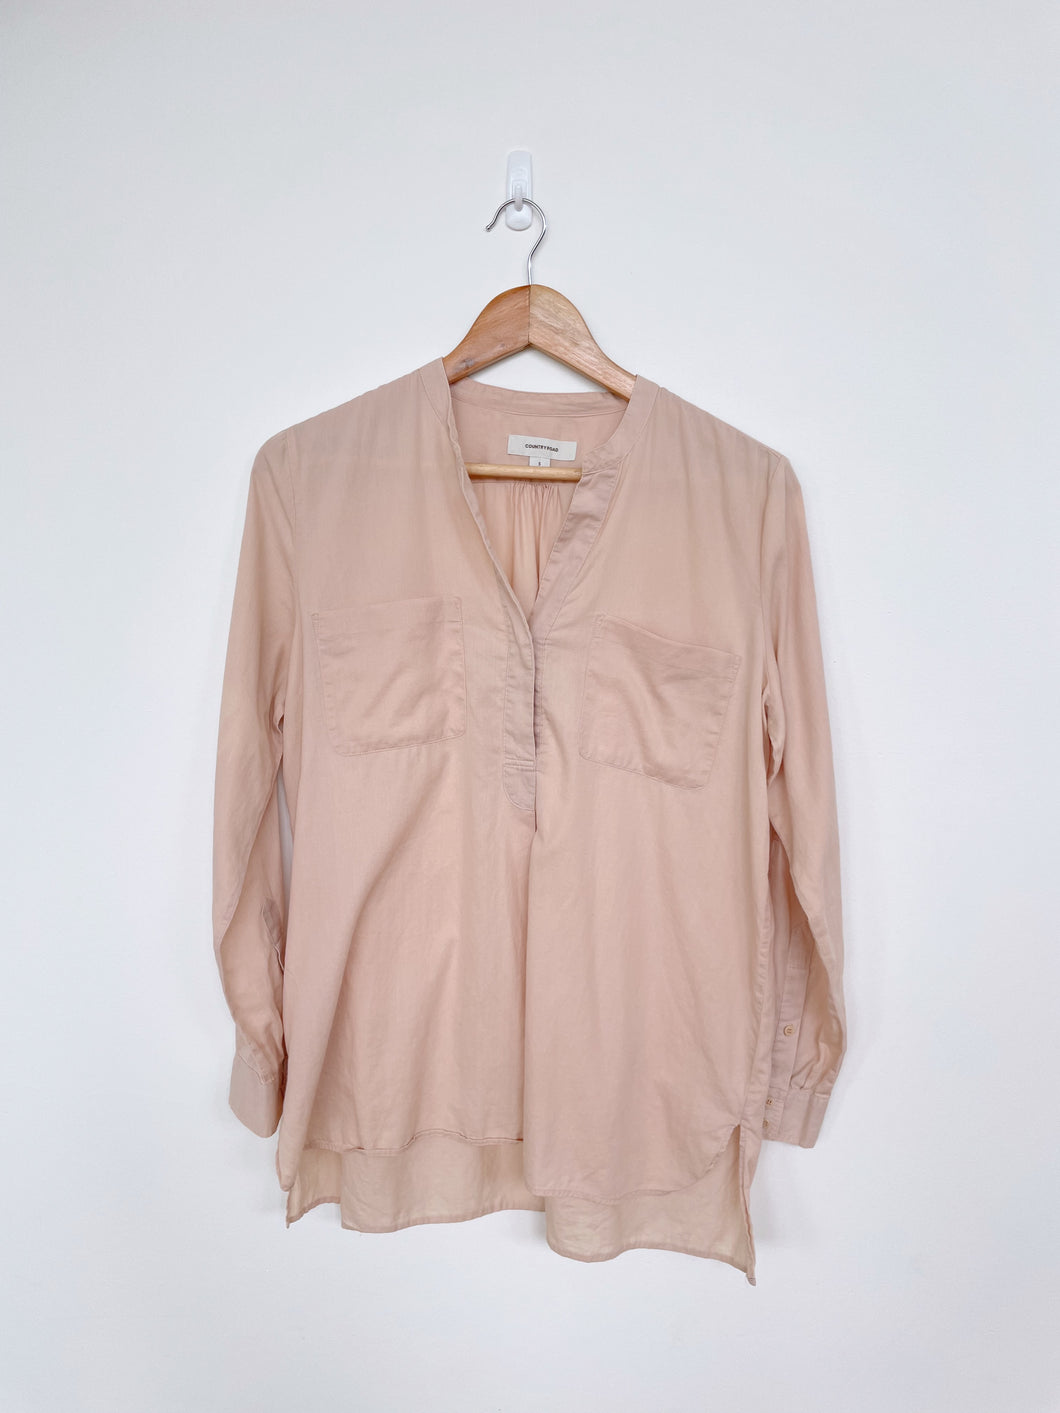 Country Road Pastel Pink Shirt (Small)